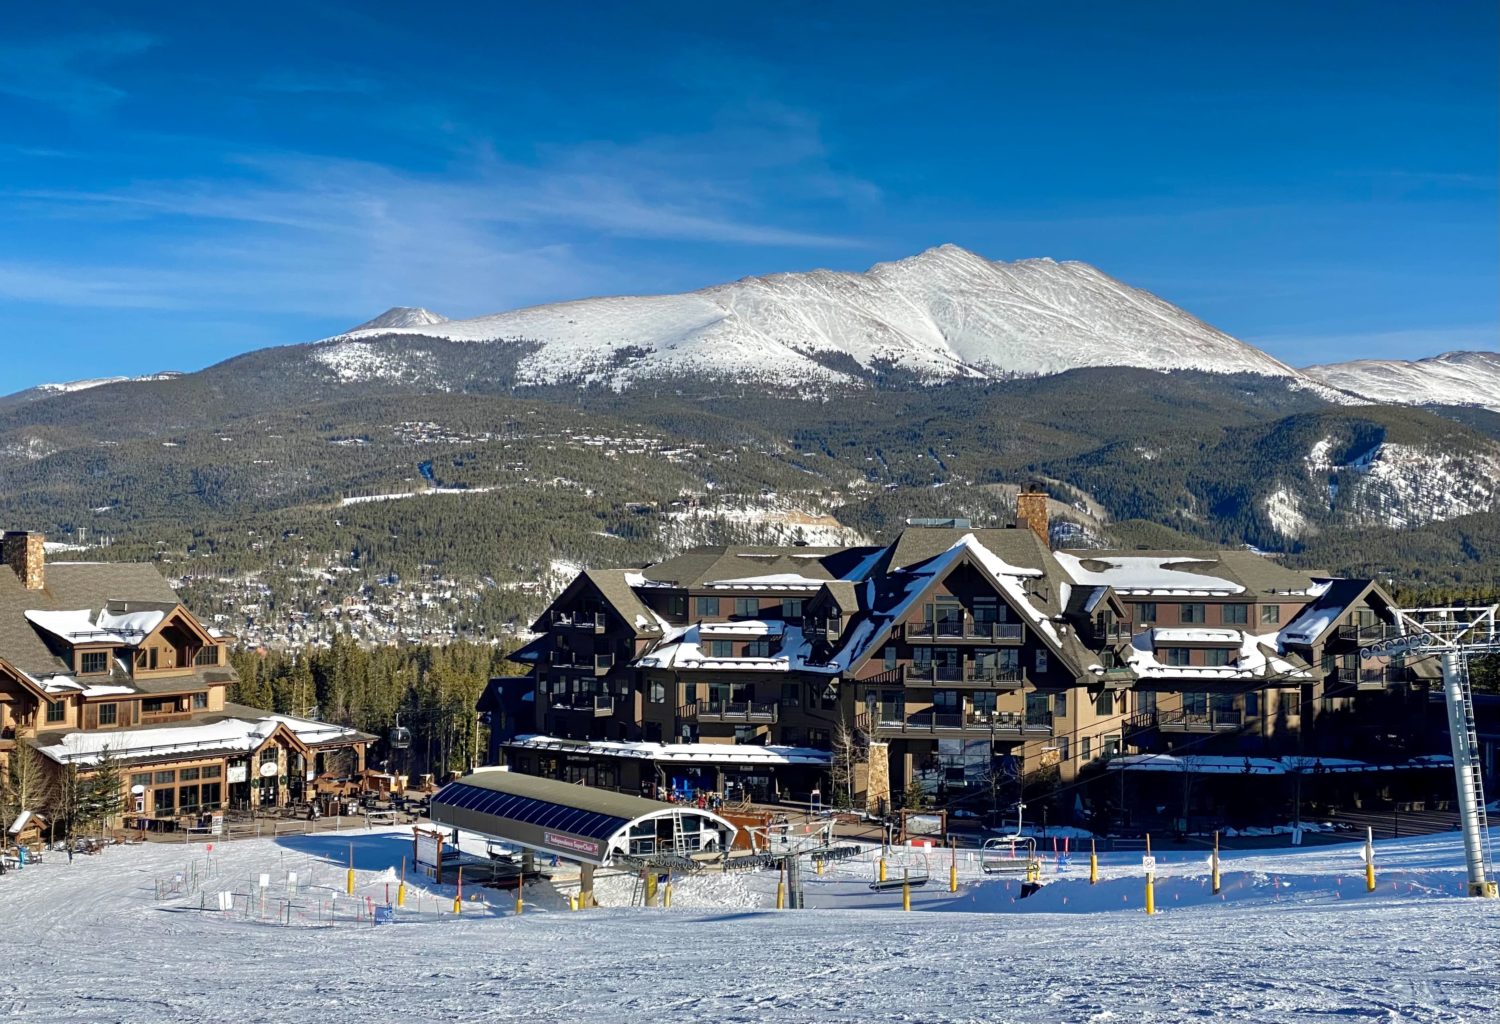 The Best Ski Resorts for Beginners in Colorado